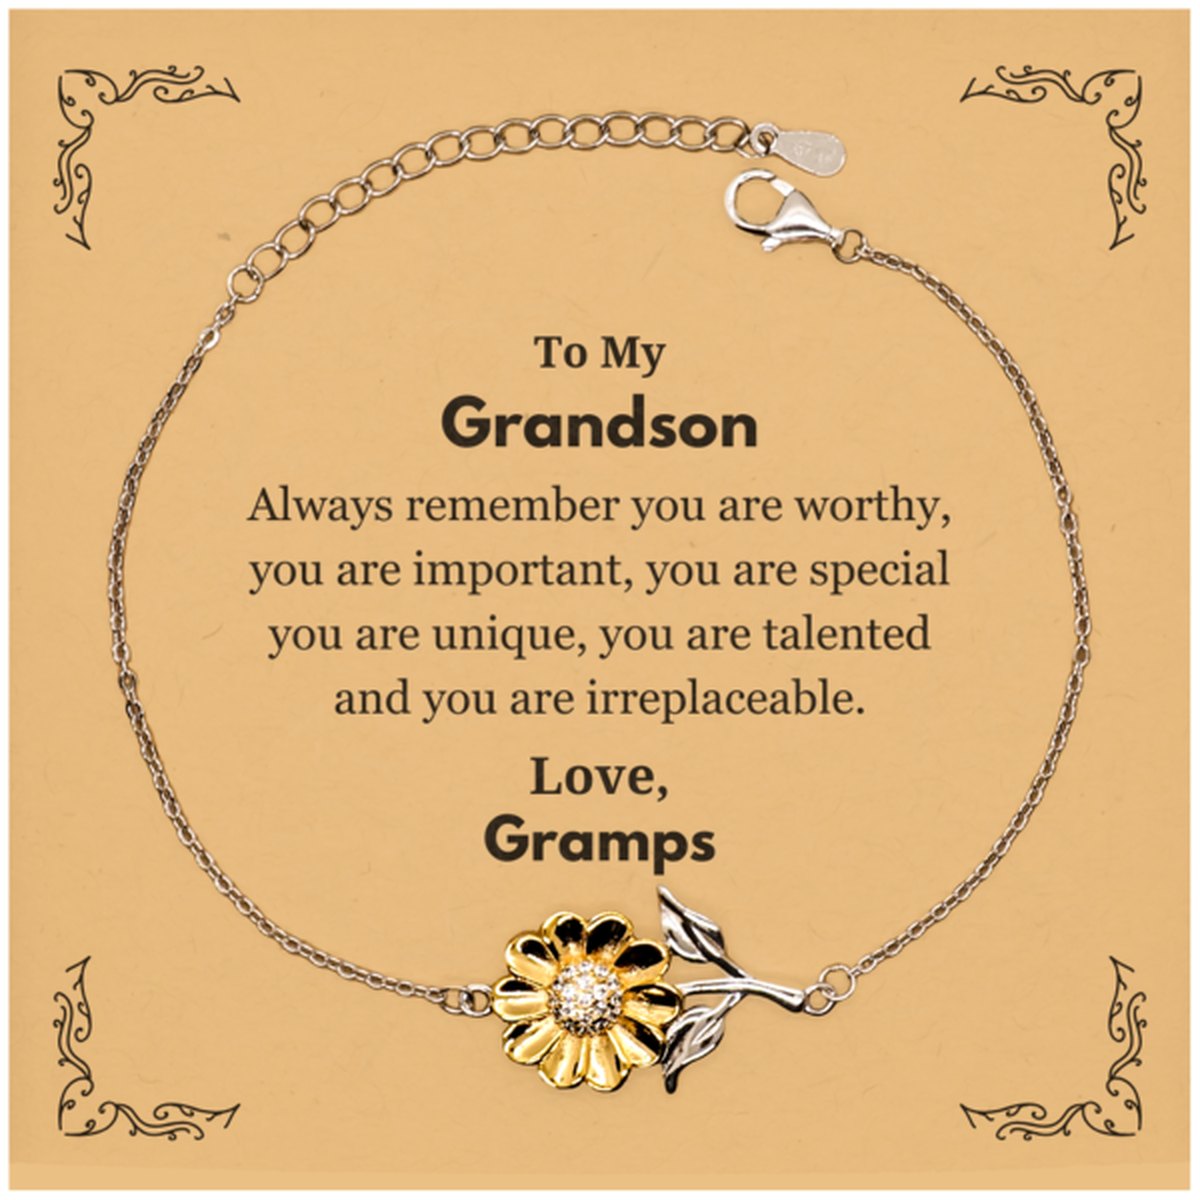 Grandson Birthday Gifts from Gramps, Inspirational Sunflower Bracelet for Grandson Christmas Graduation Gifts for Grandson Always remember you are worthy, you are important. Love, Gramps